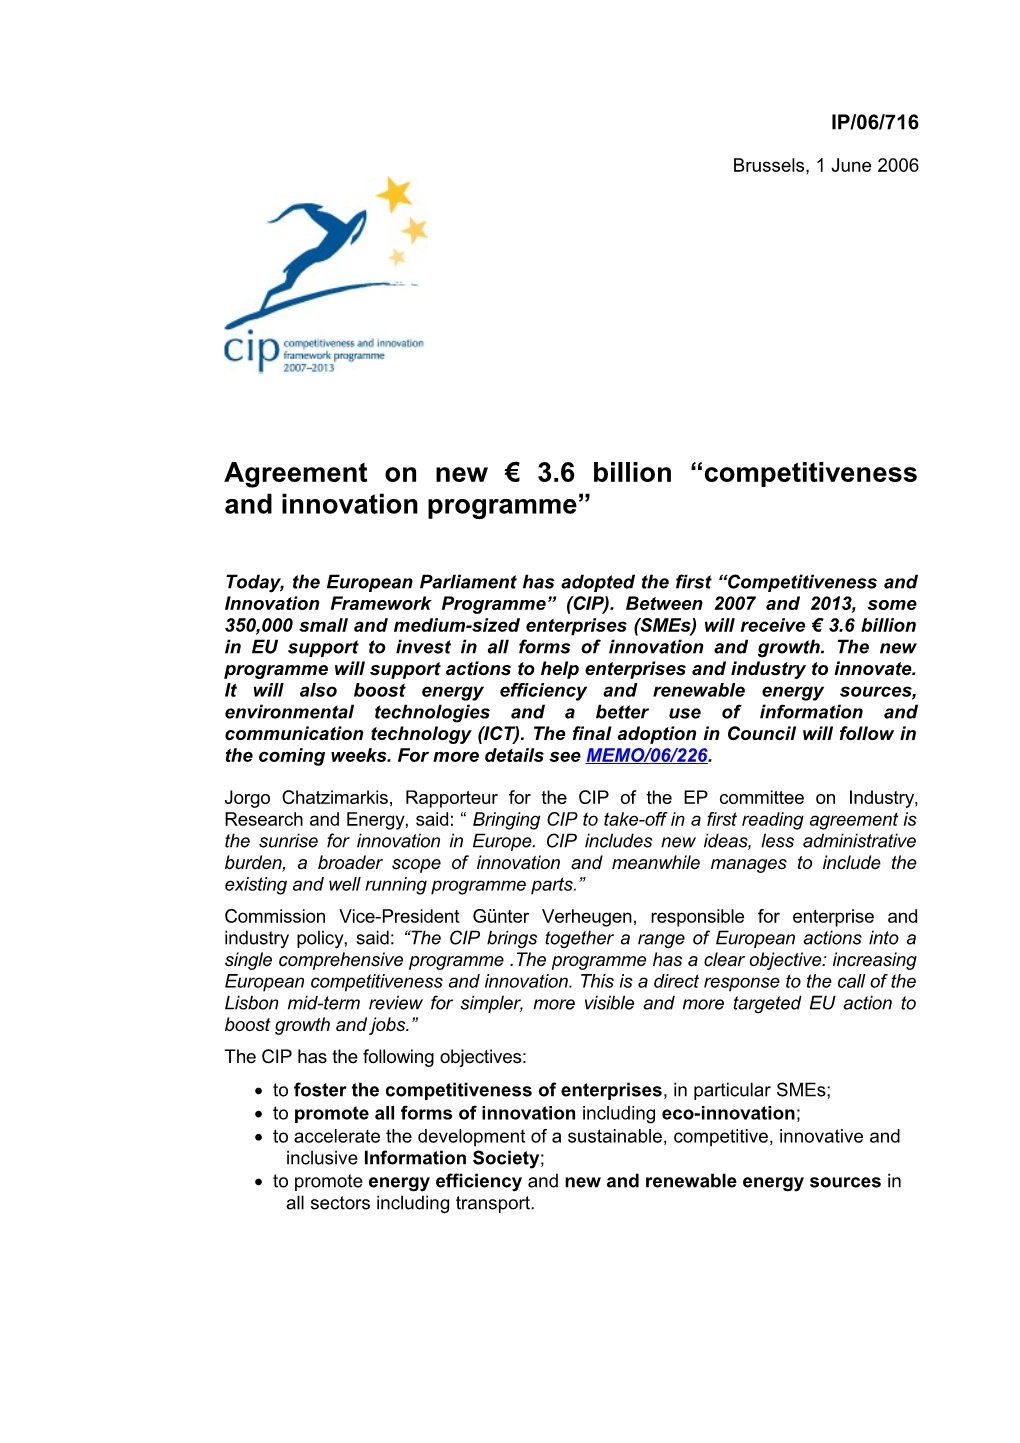 Agreement on New 3.6 Billion Competitiveness and Innovation Programme